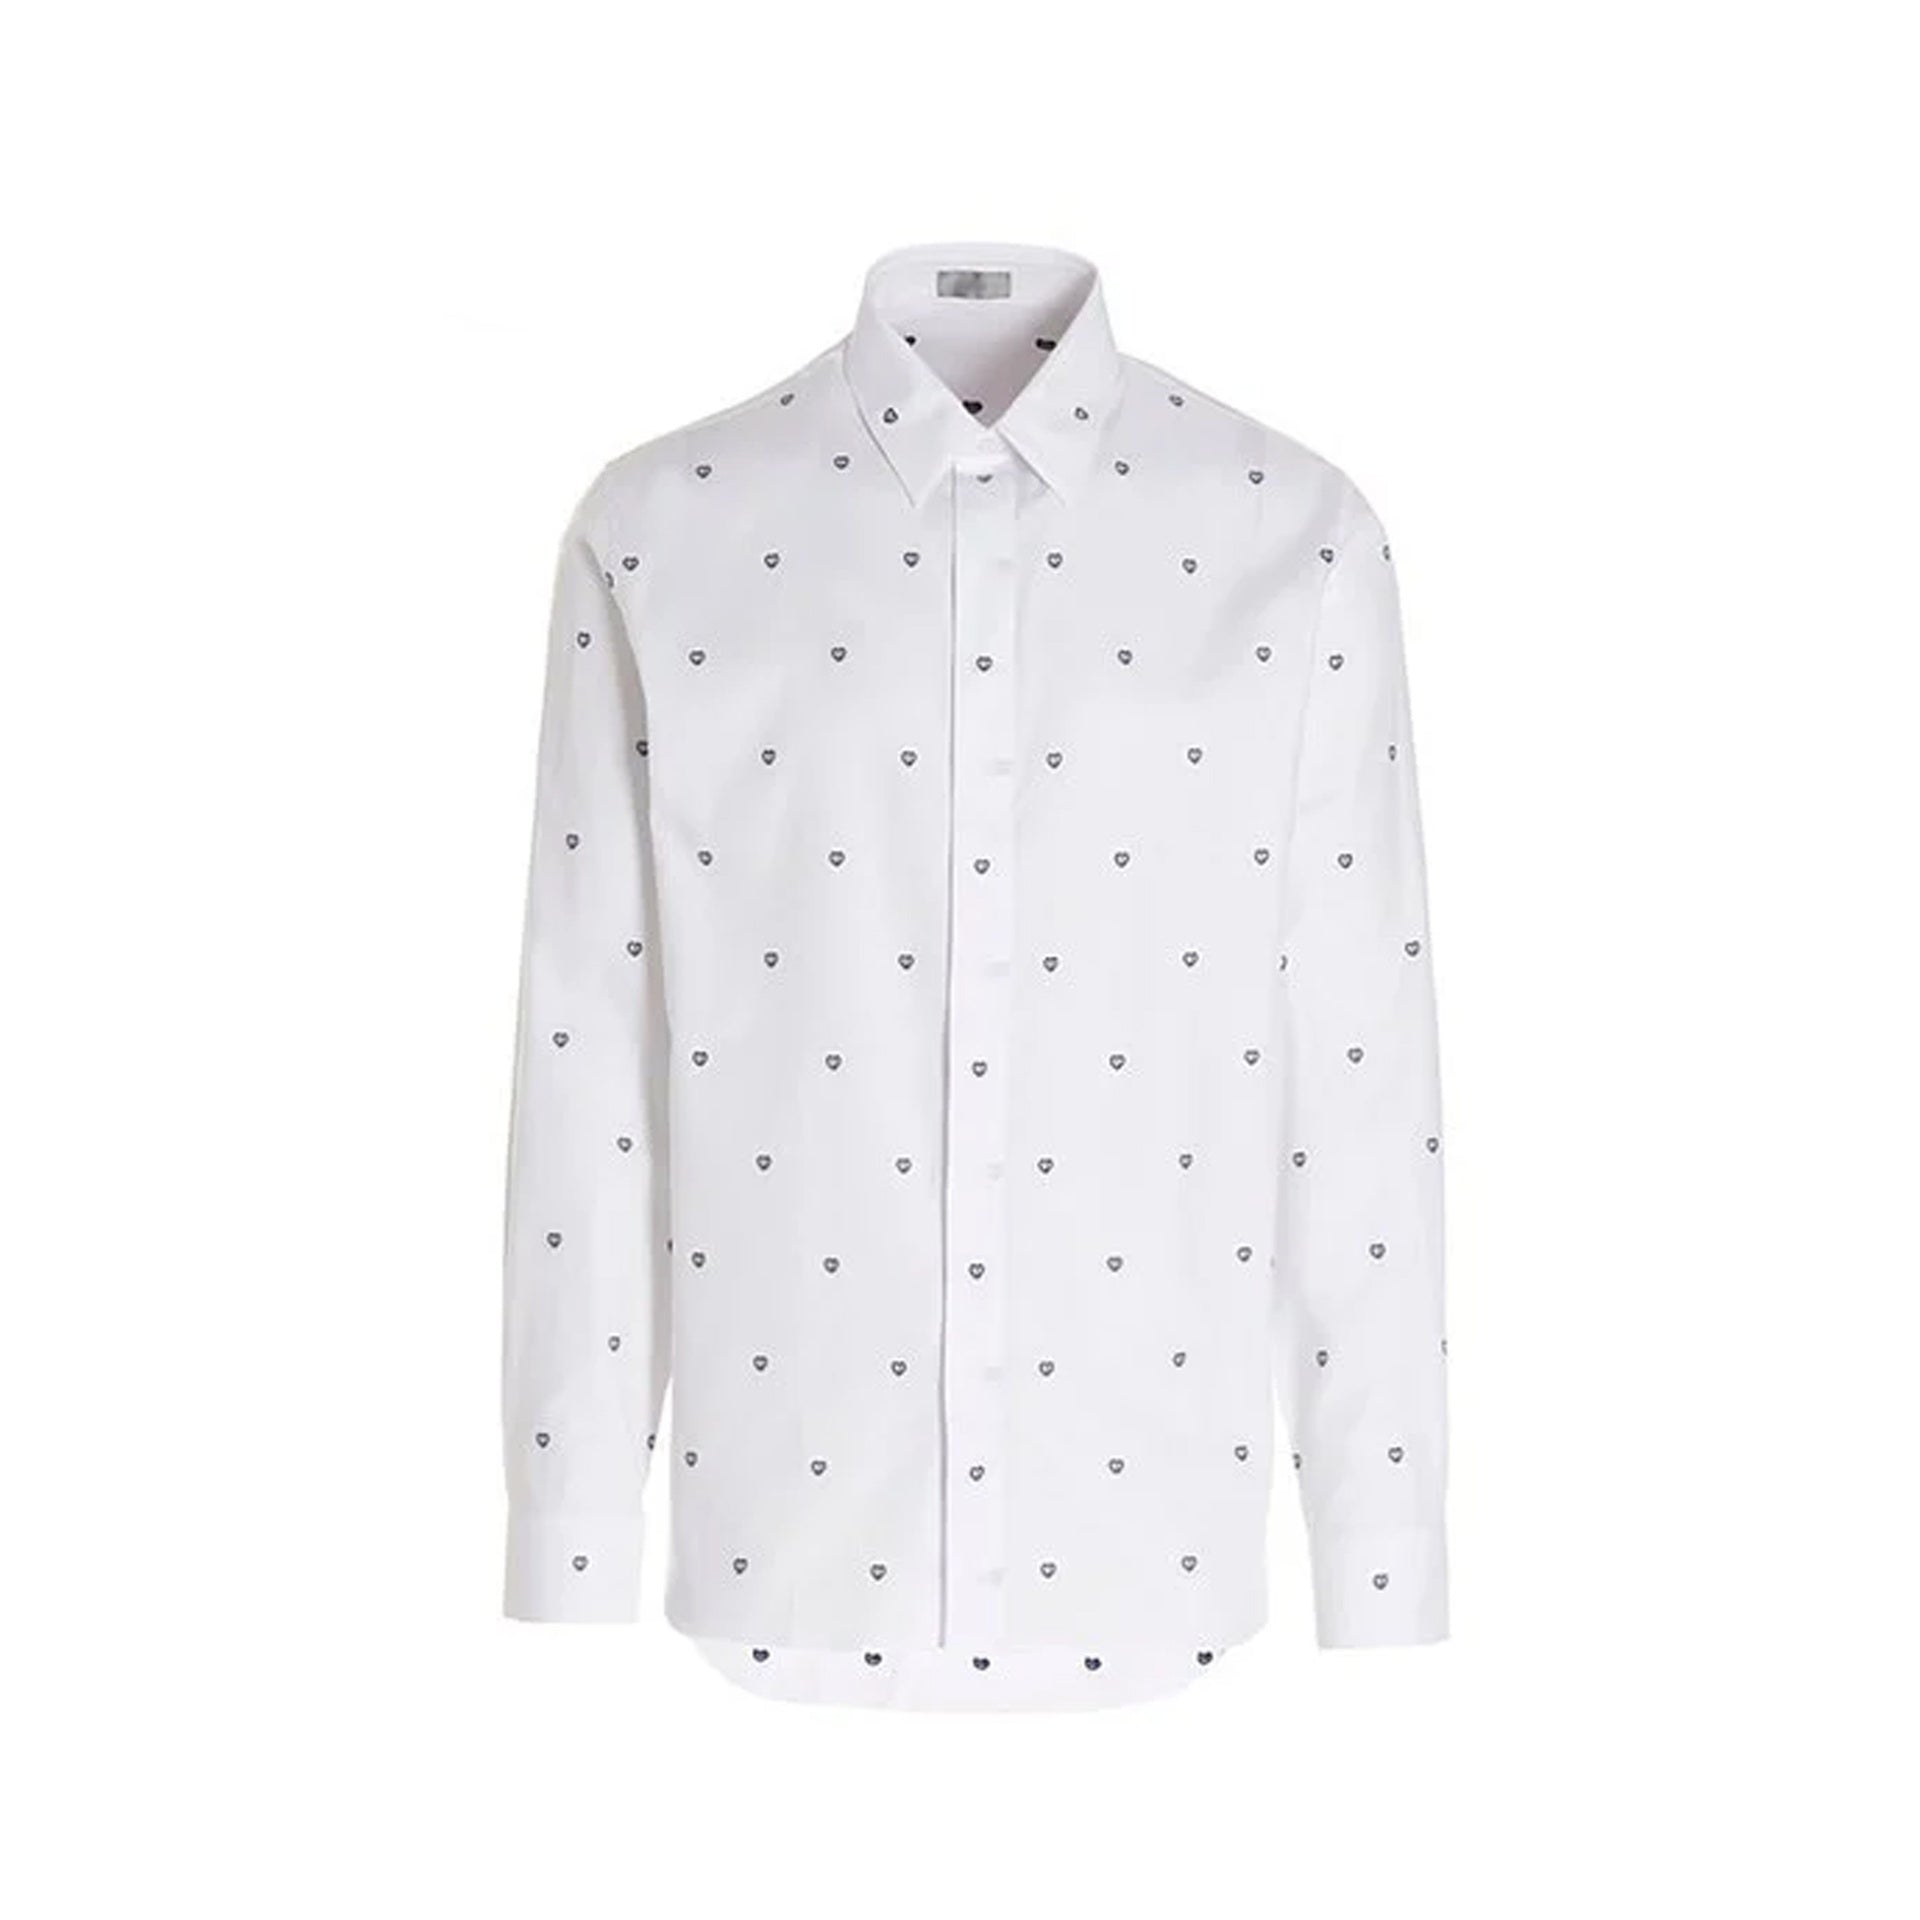 DIOR-OUTLET-SALE-DIOR-Logo-Embroidered-Detail-Shirt-Shirts-WHITE-39-ARCHIVE-COLLECTION.jpg